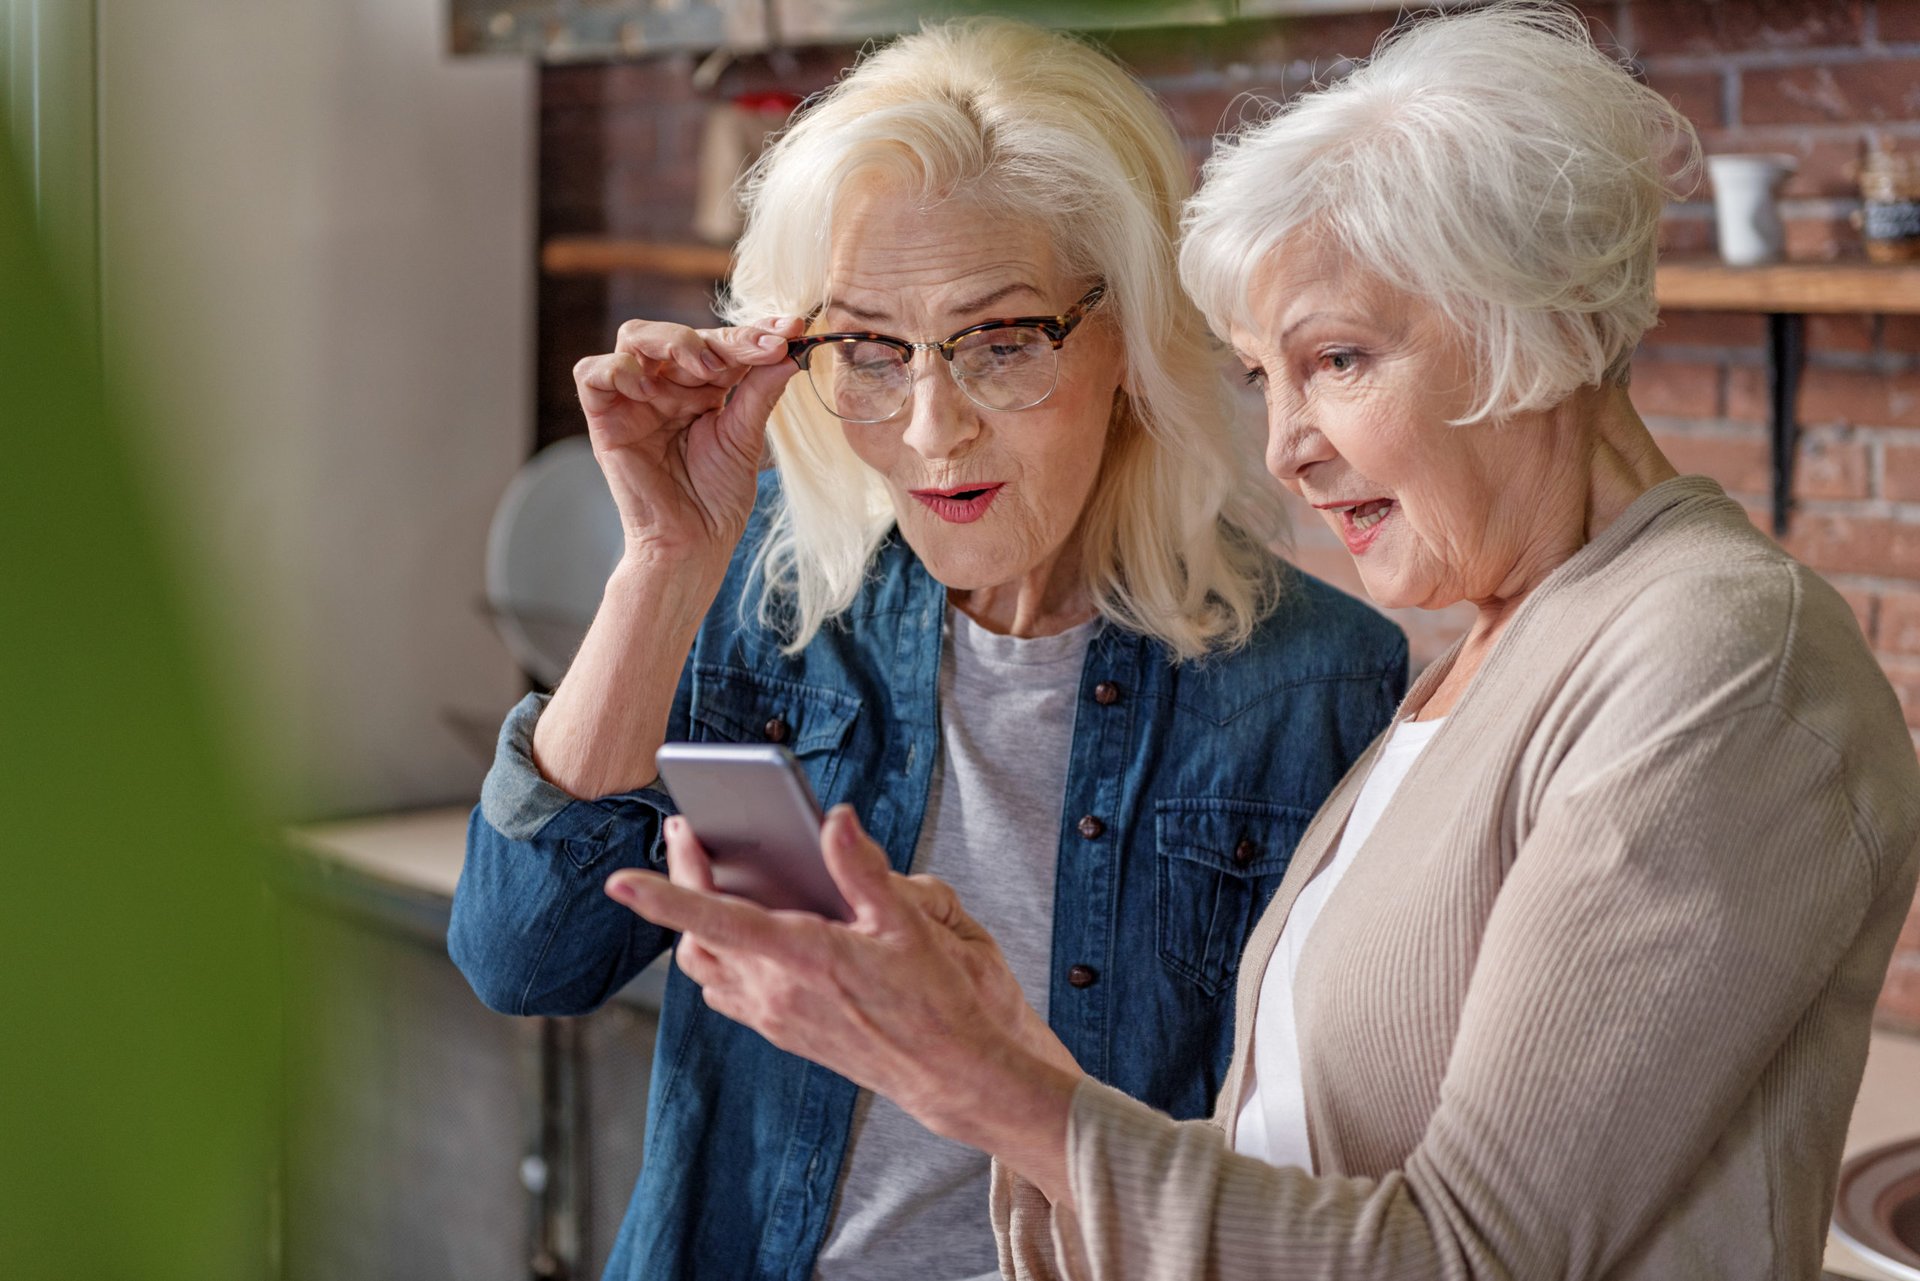 Two older women look at a smartphone